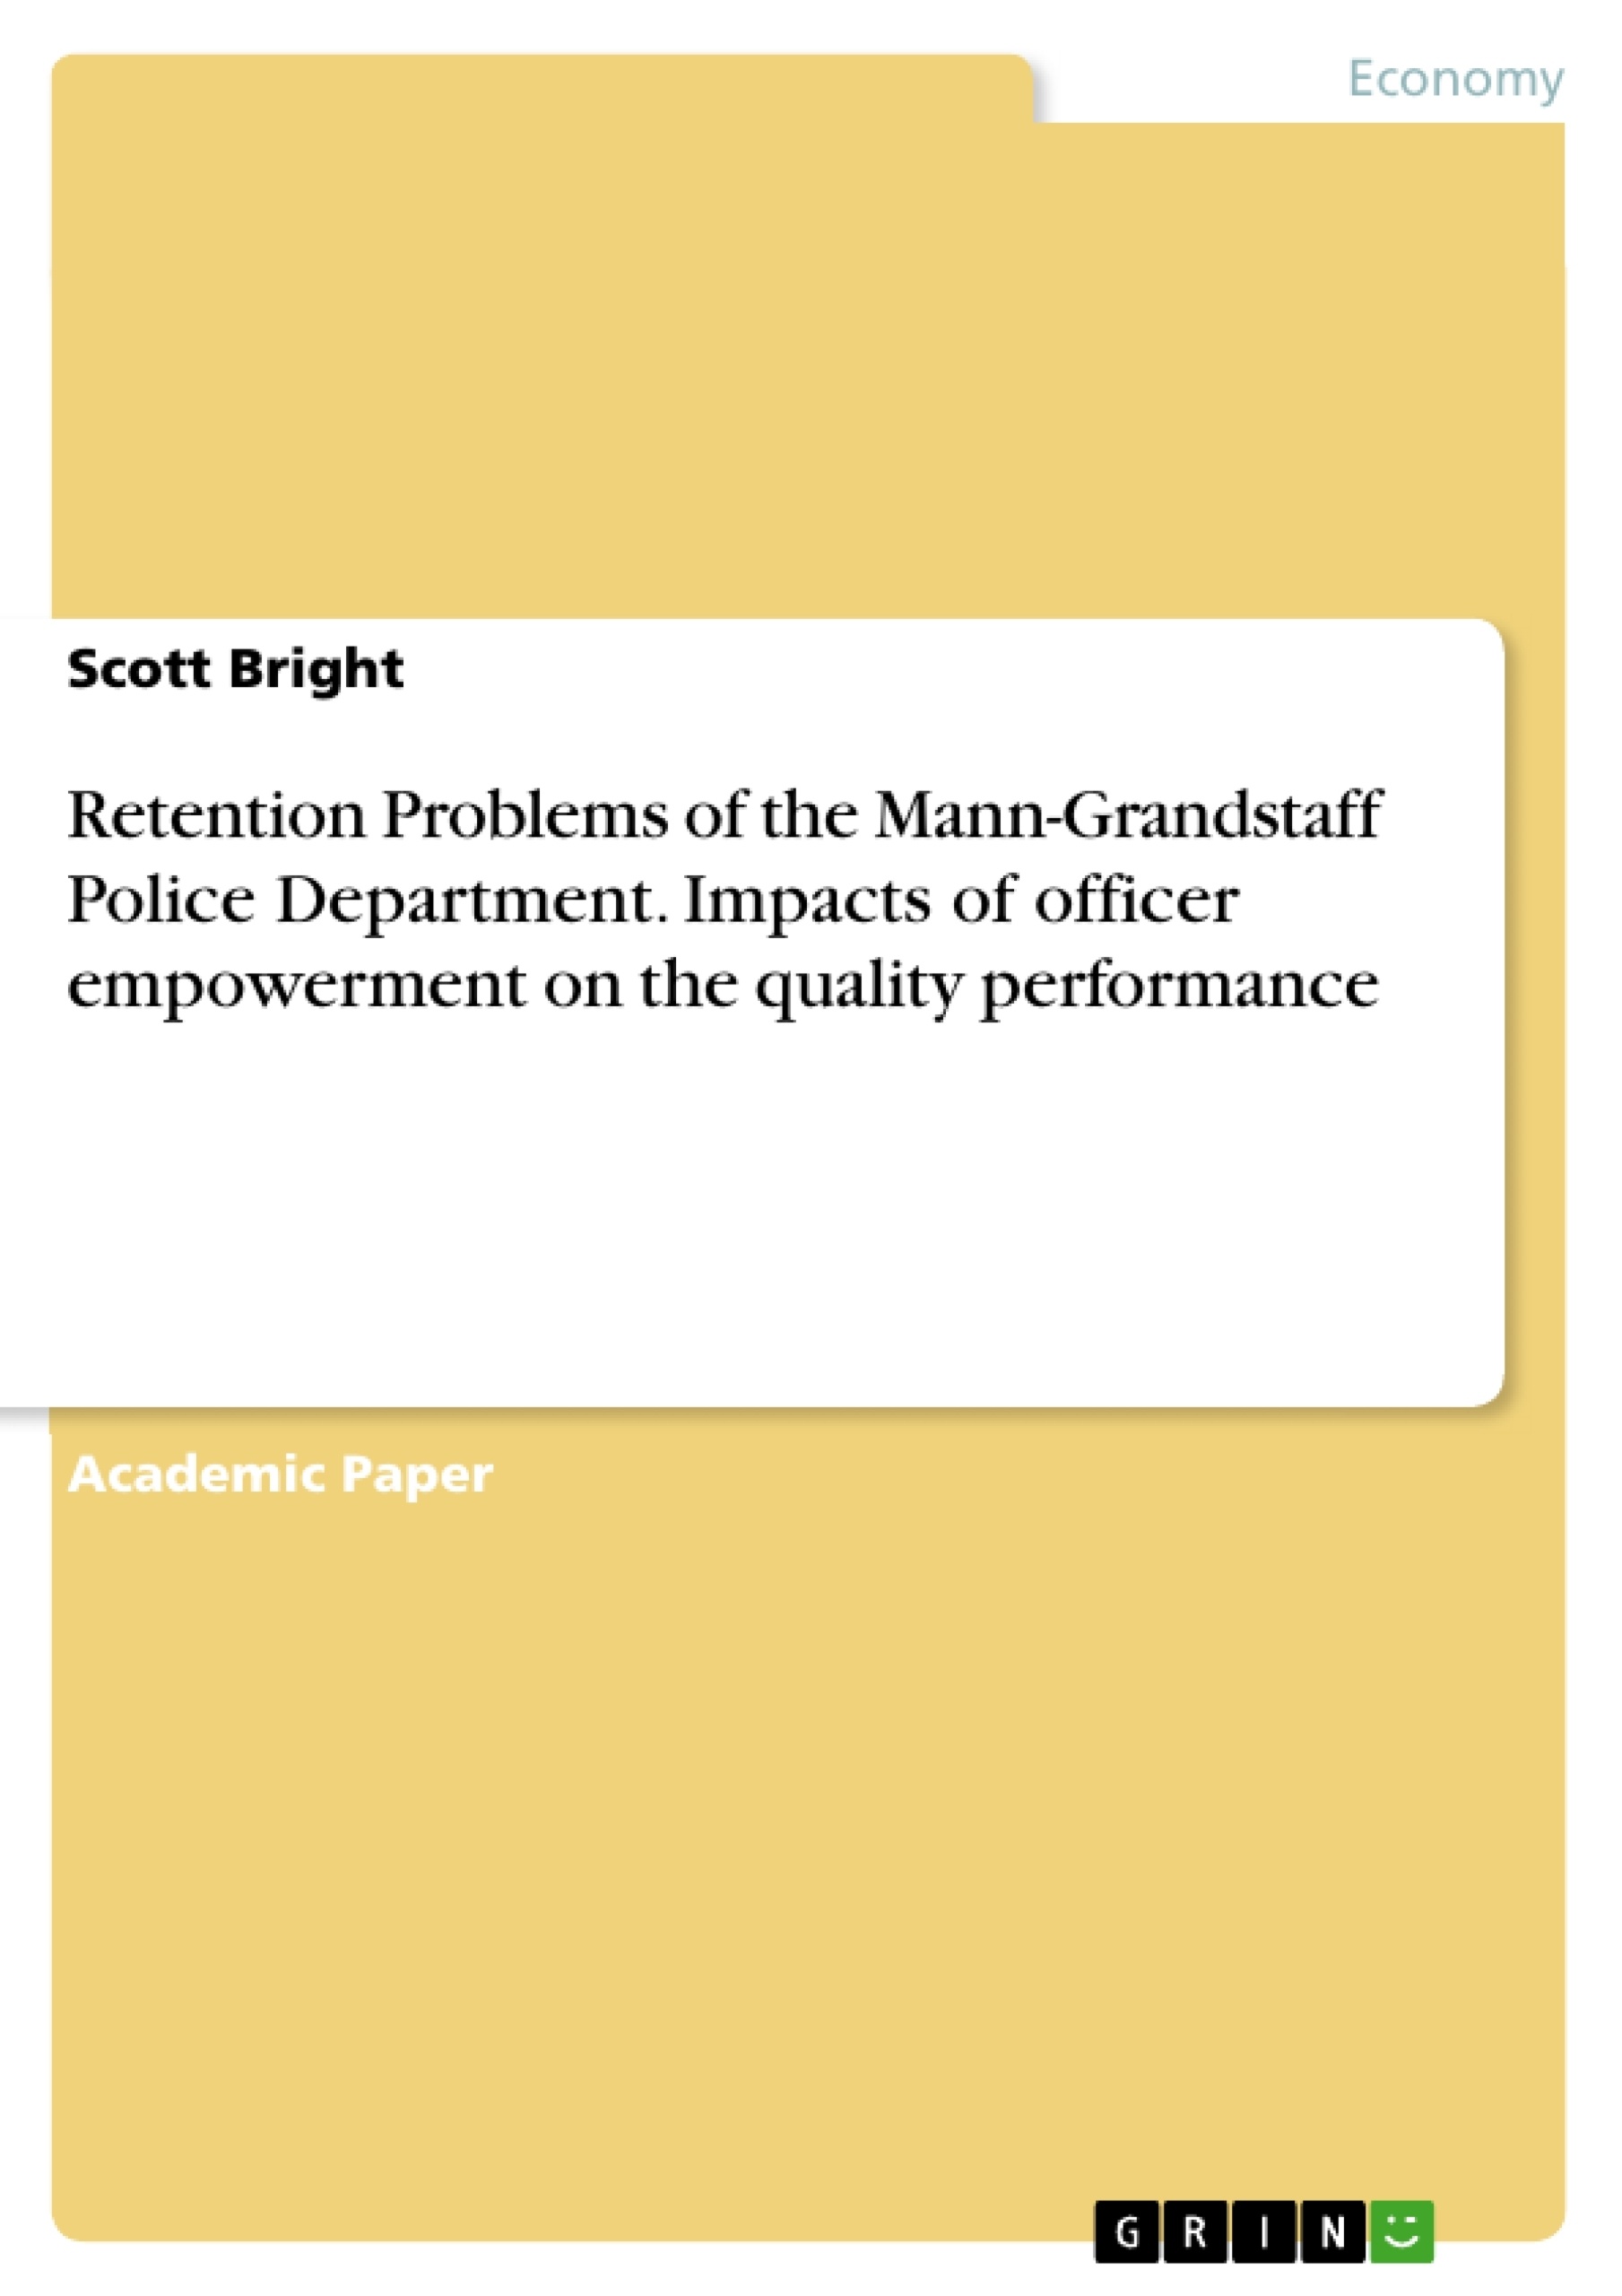 Título: Retention Problems of the Mann-Grandstaff Police Department. Impacts of officer empowerment on the quality performance